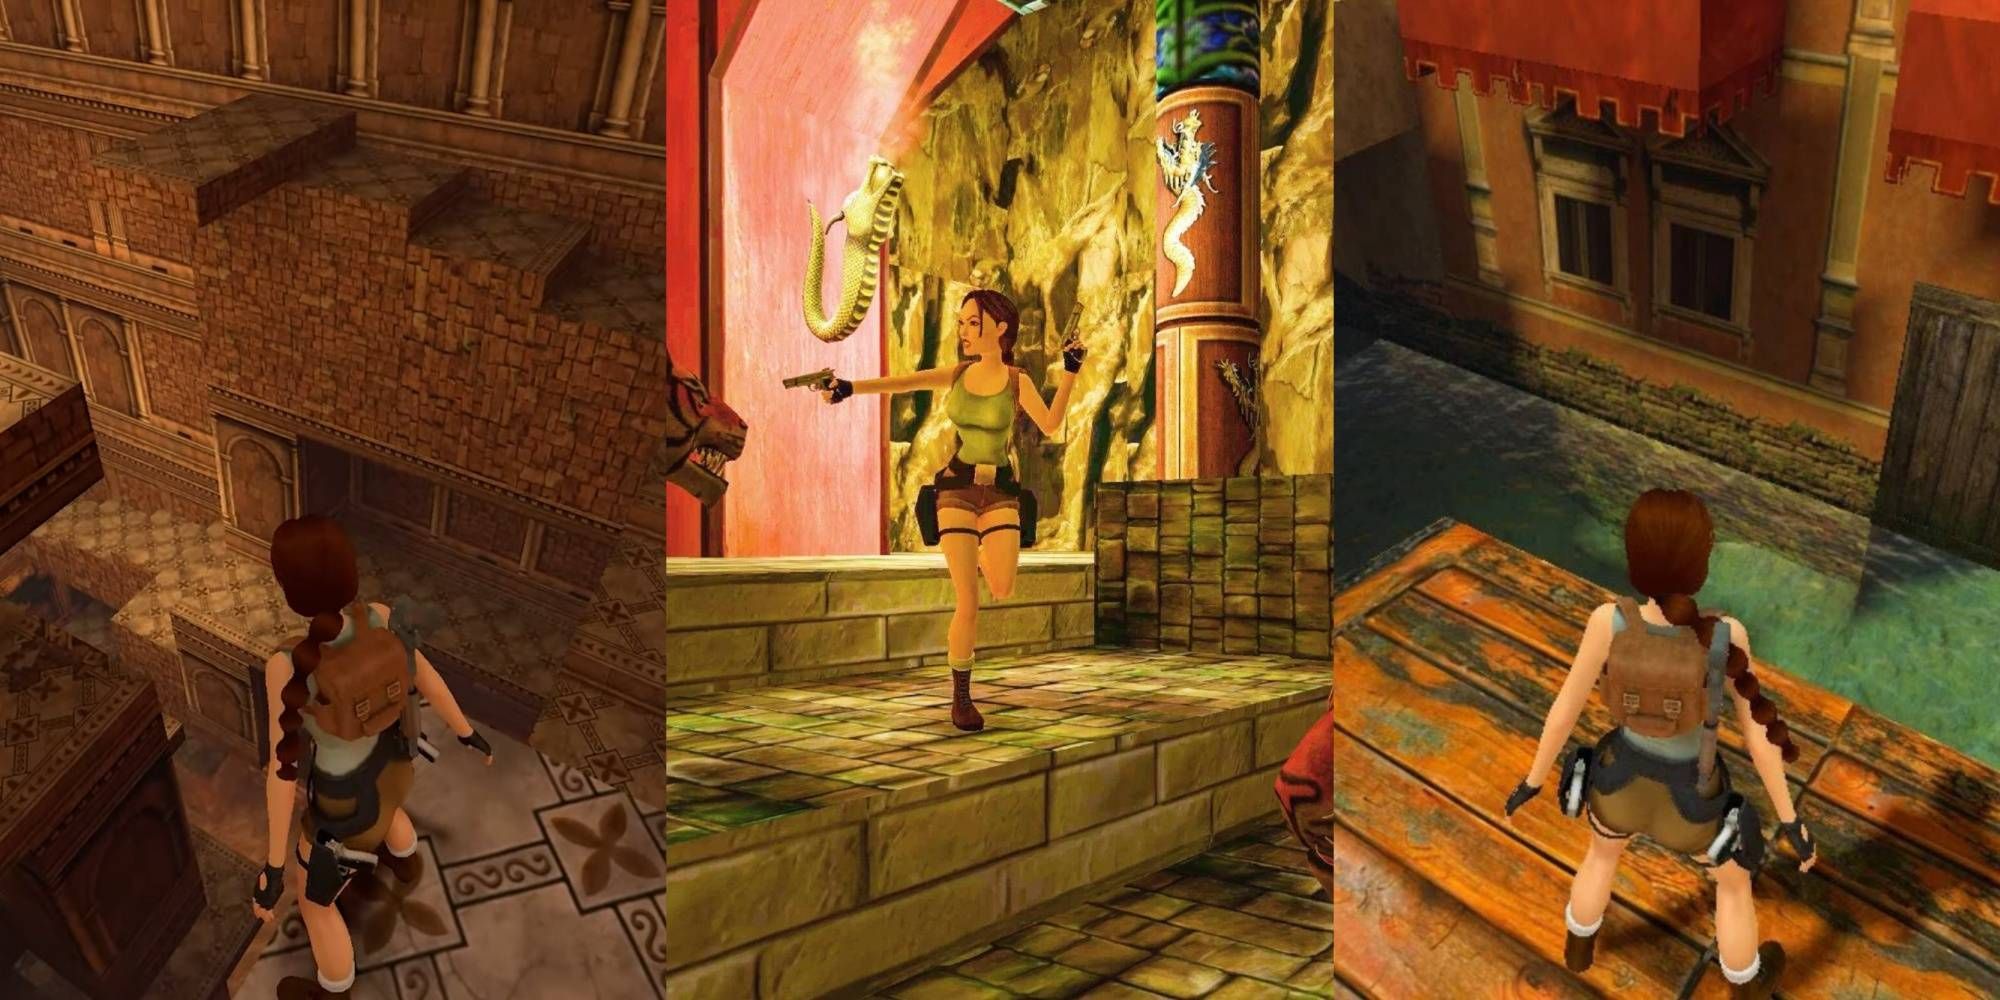 A collage of images of Lara Croft in different places from tombs to canals of Tomb Raider 1-3 Remastered